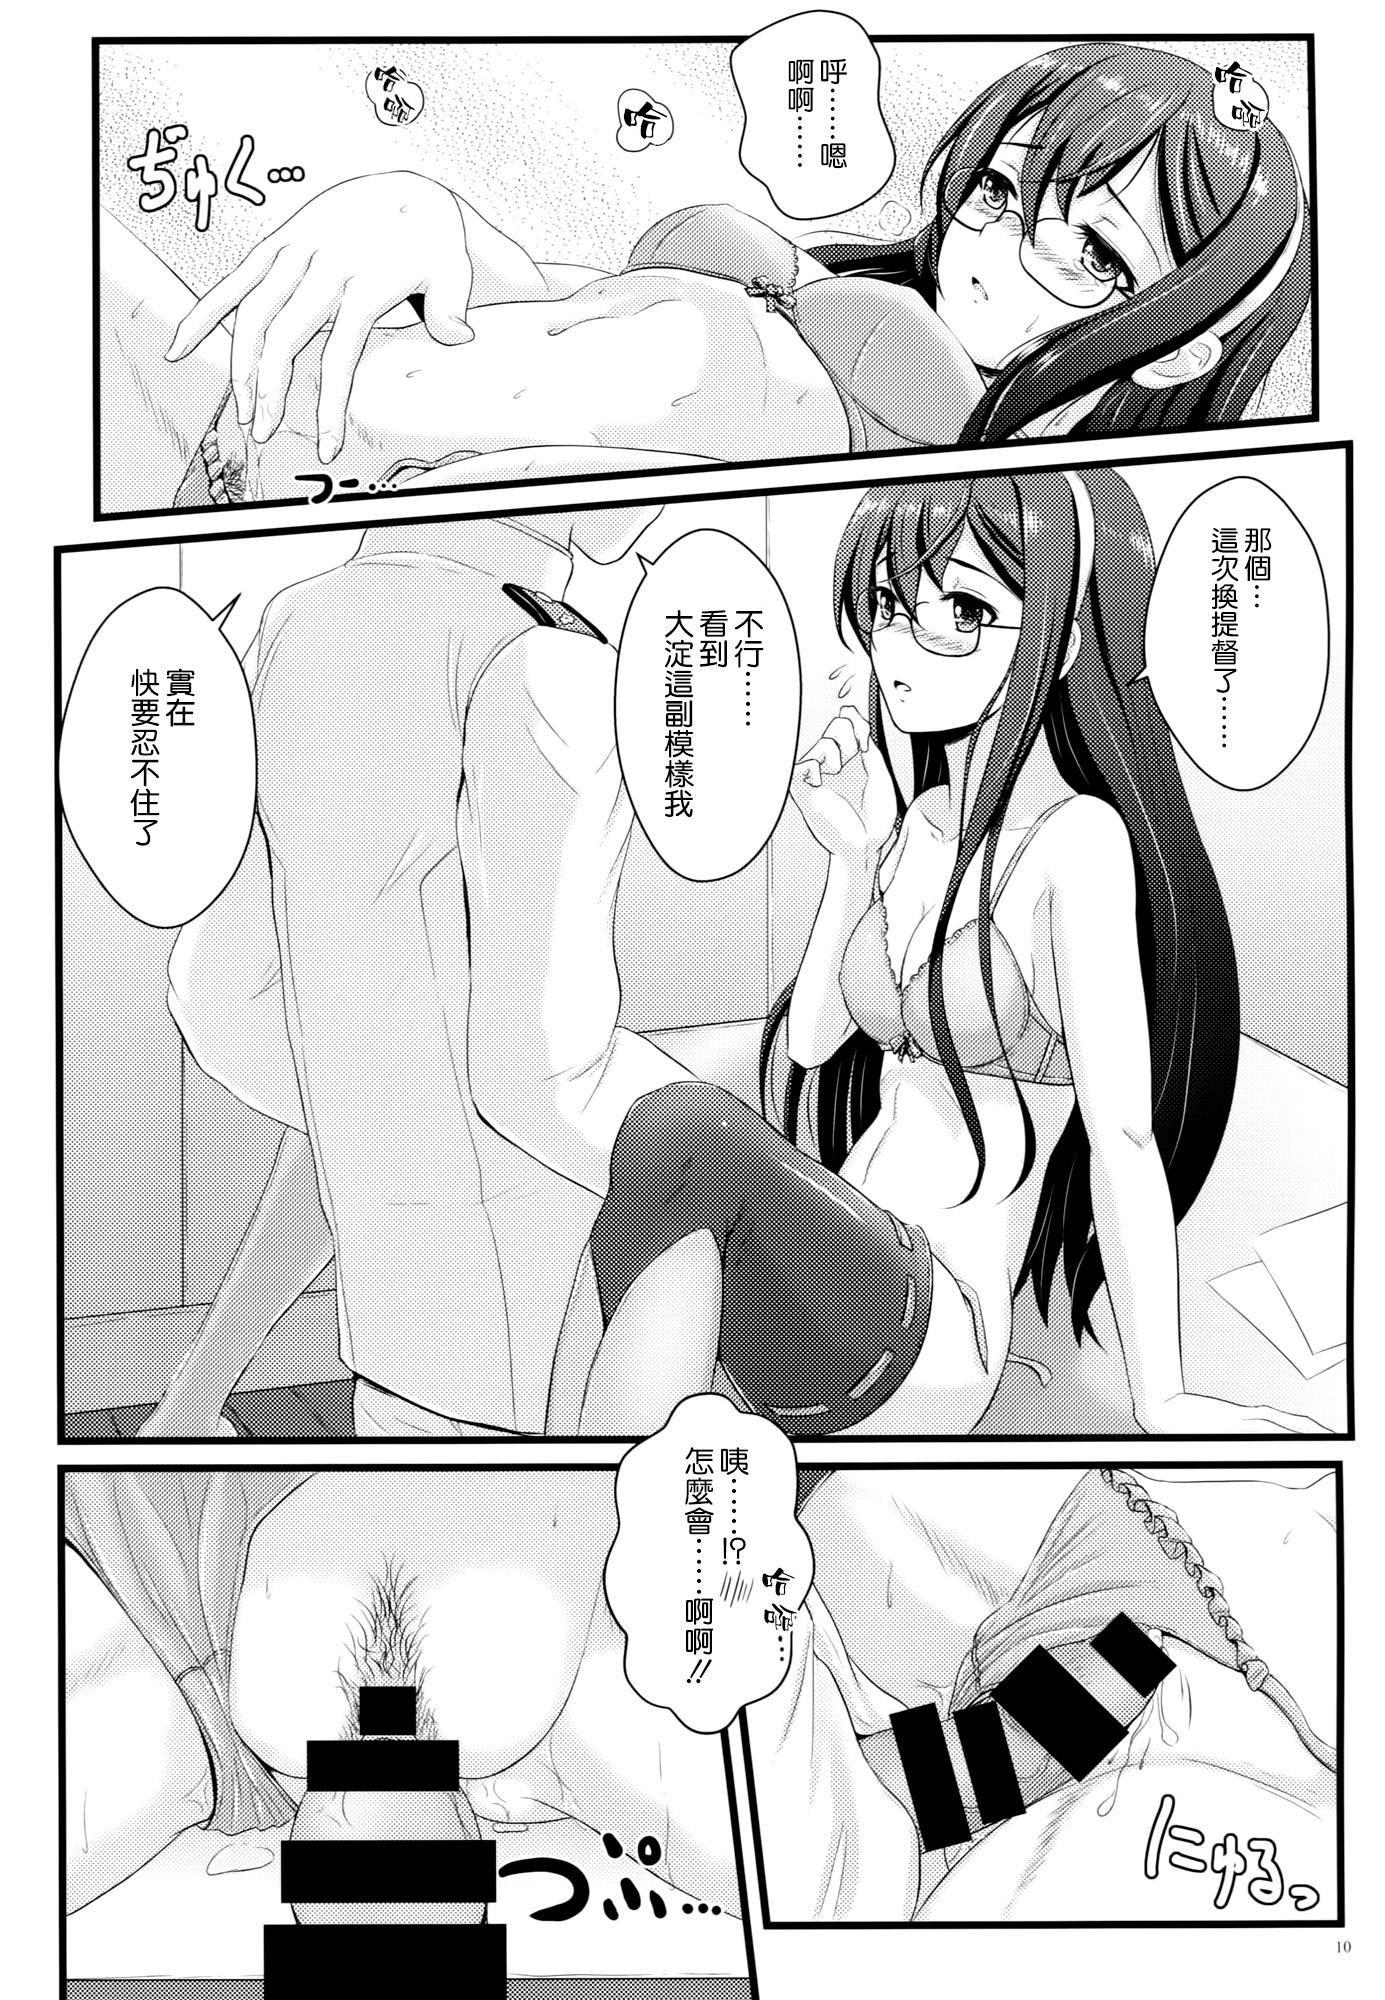 Mulher Private Secretary - Kantai collection Chilena - Page 10